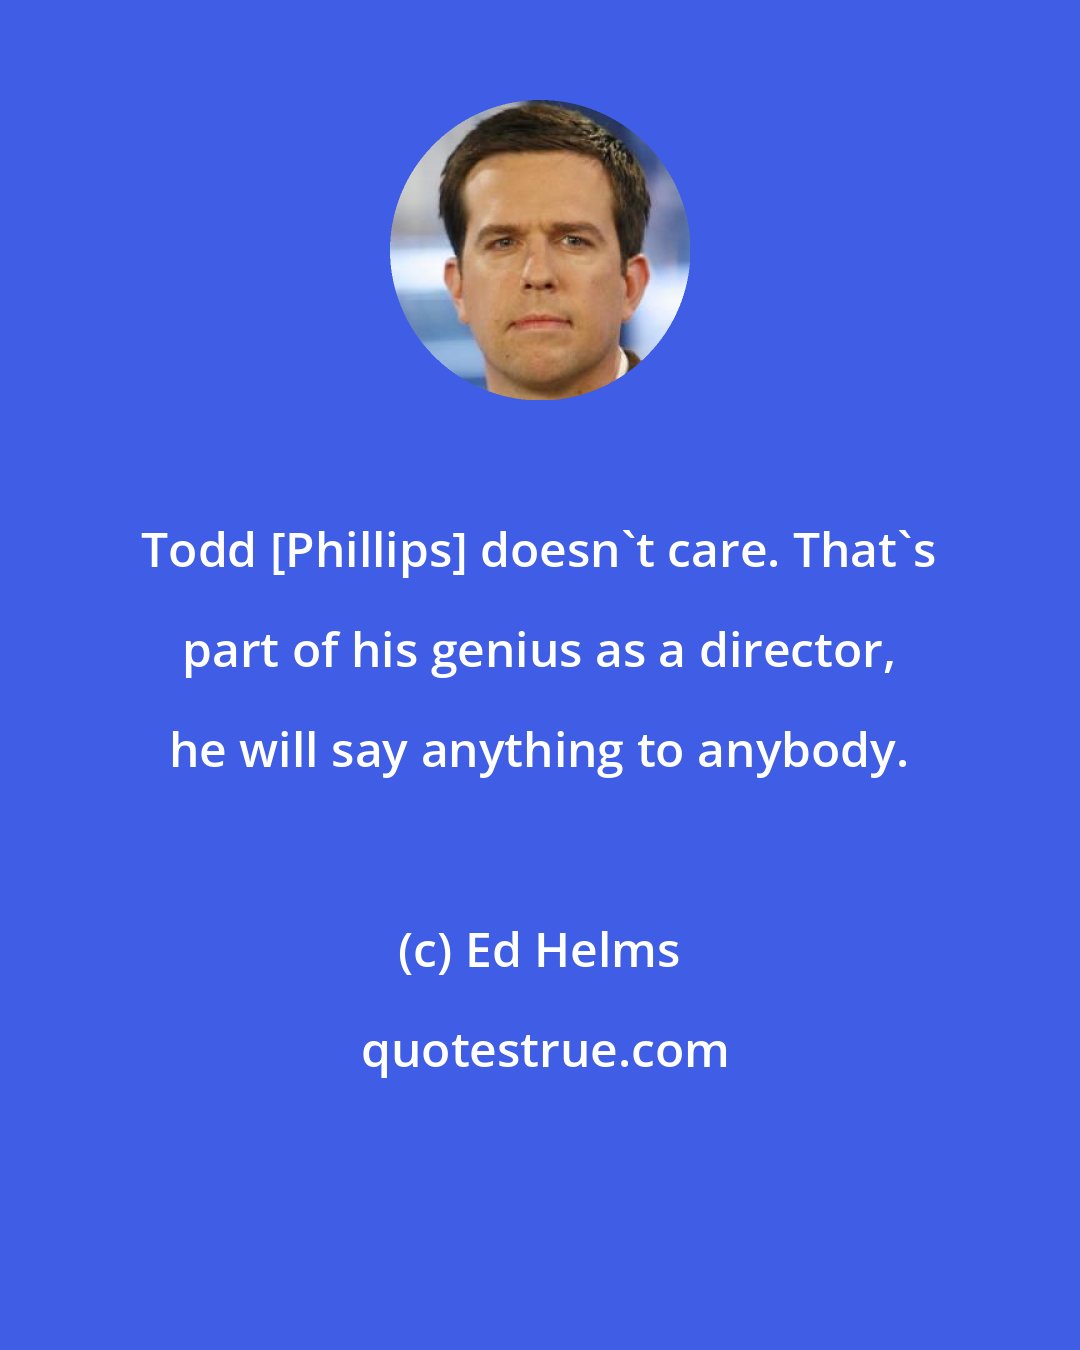 Ed Helms: Todd [Phillips] doesn't care. That's part of his genius as a director, he will say anything to anybody.